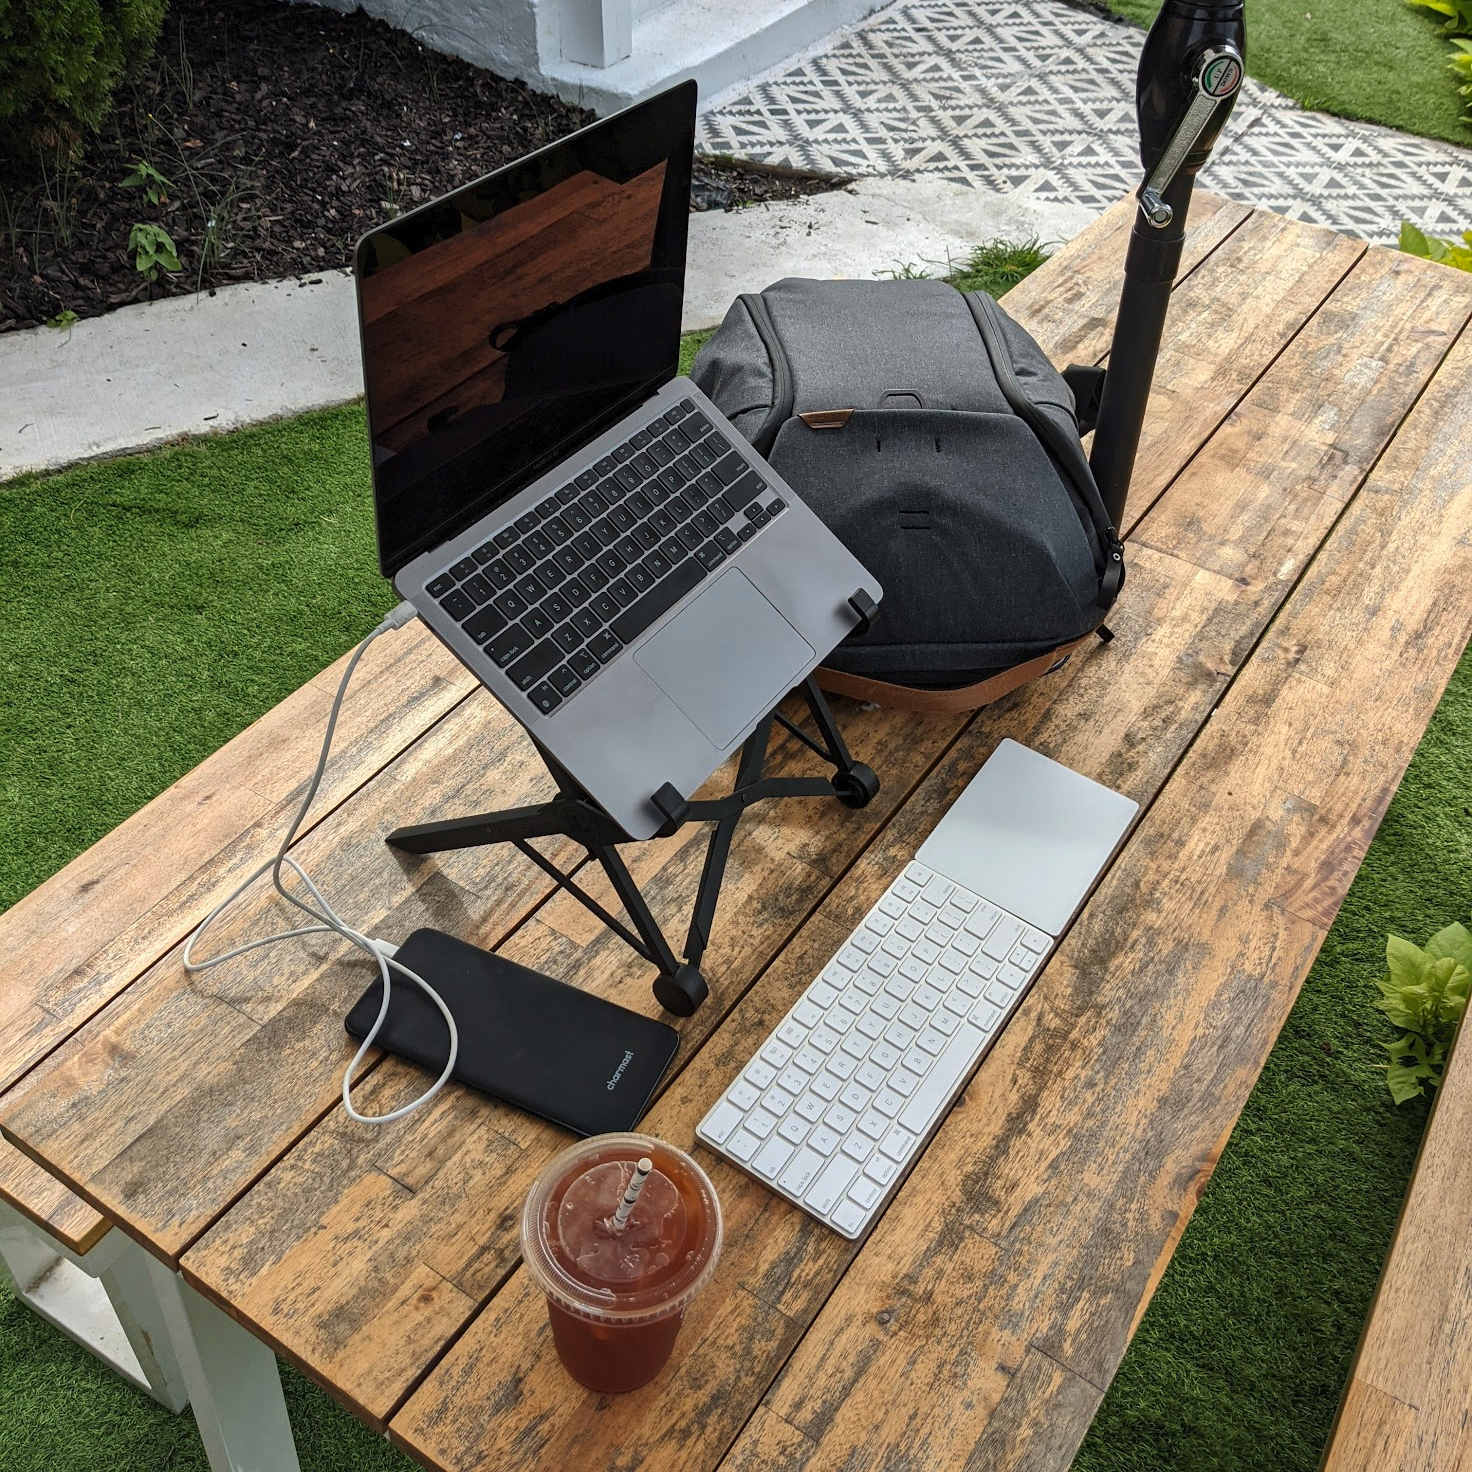 Casey's laptop setup outdoors: laptop on a stand, wireless trackpad and keyboard, headset, iced tea - all on a picnic table